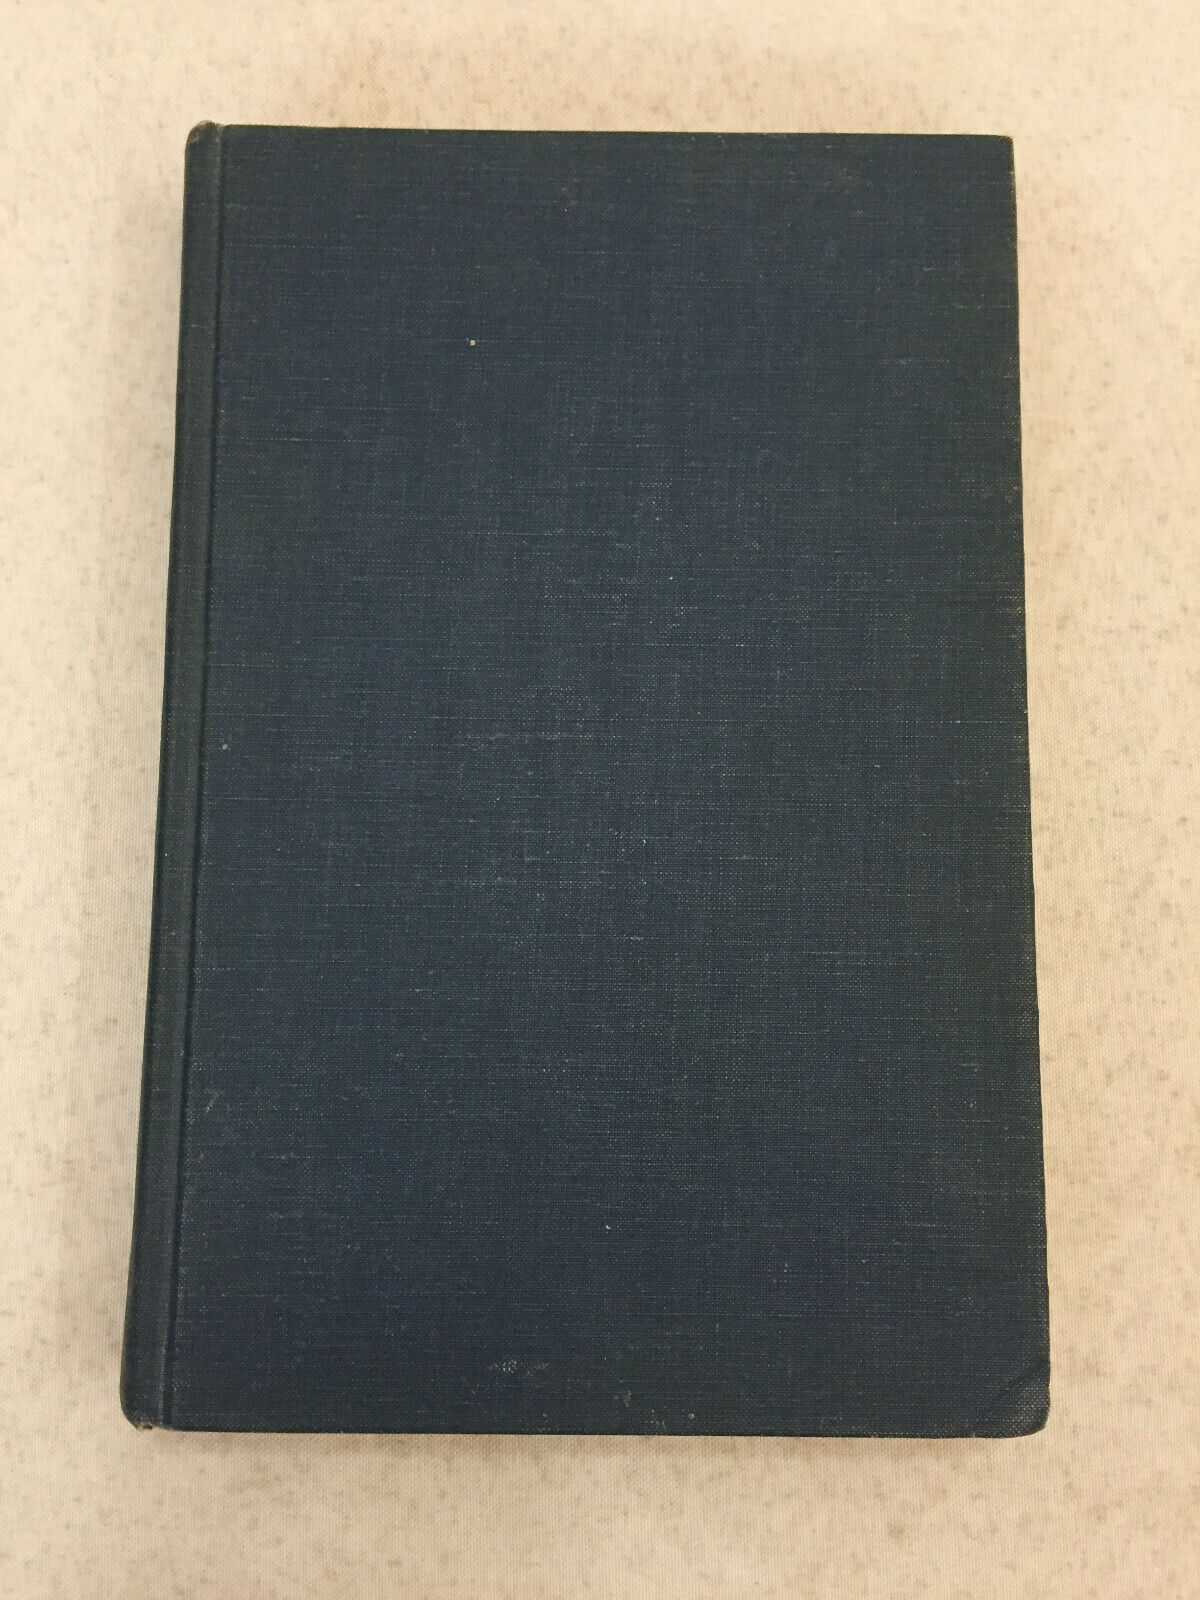 Ship Passenger Lists: The South (1538-1825) By Carl Boyer 1979 Hardcover